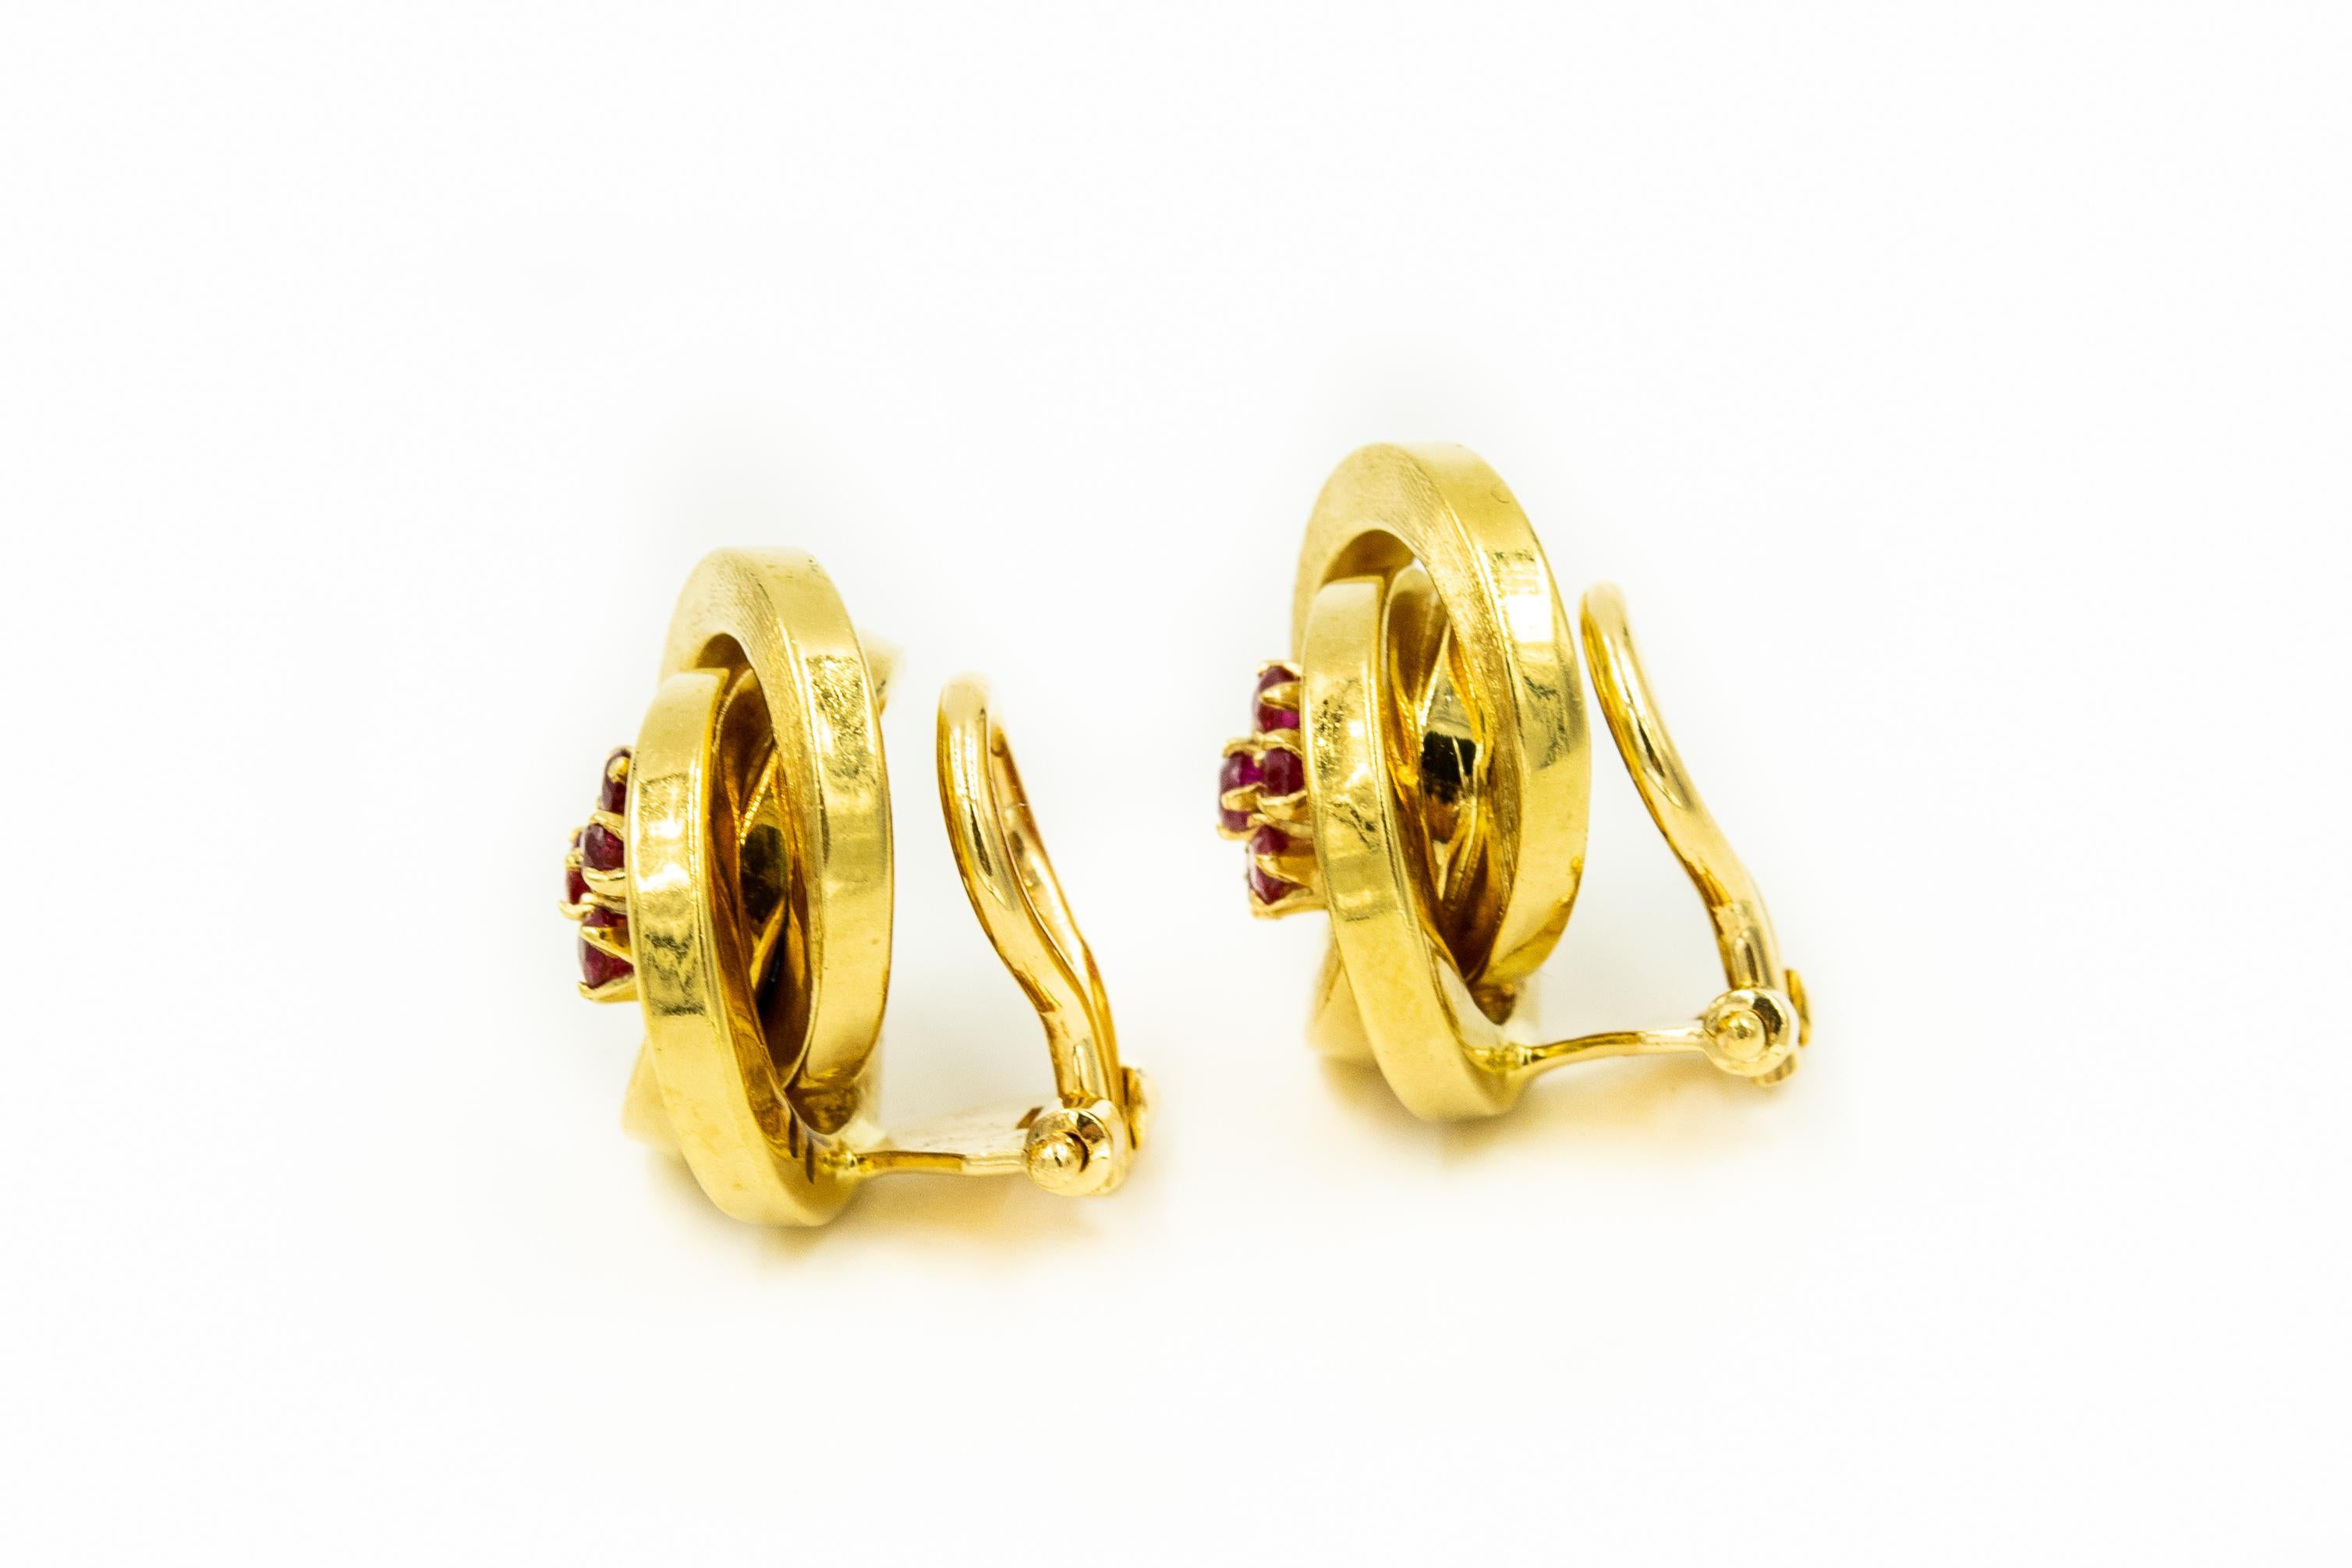 Beautifully made three dimensional Italian clip-on earrings featuring 3 interlocking round rings that swirl around a ruby center that resembles a flower.  The earrings are 18k yellow gold with a Florentine matte finish.  The earrings have a lever